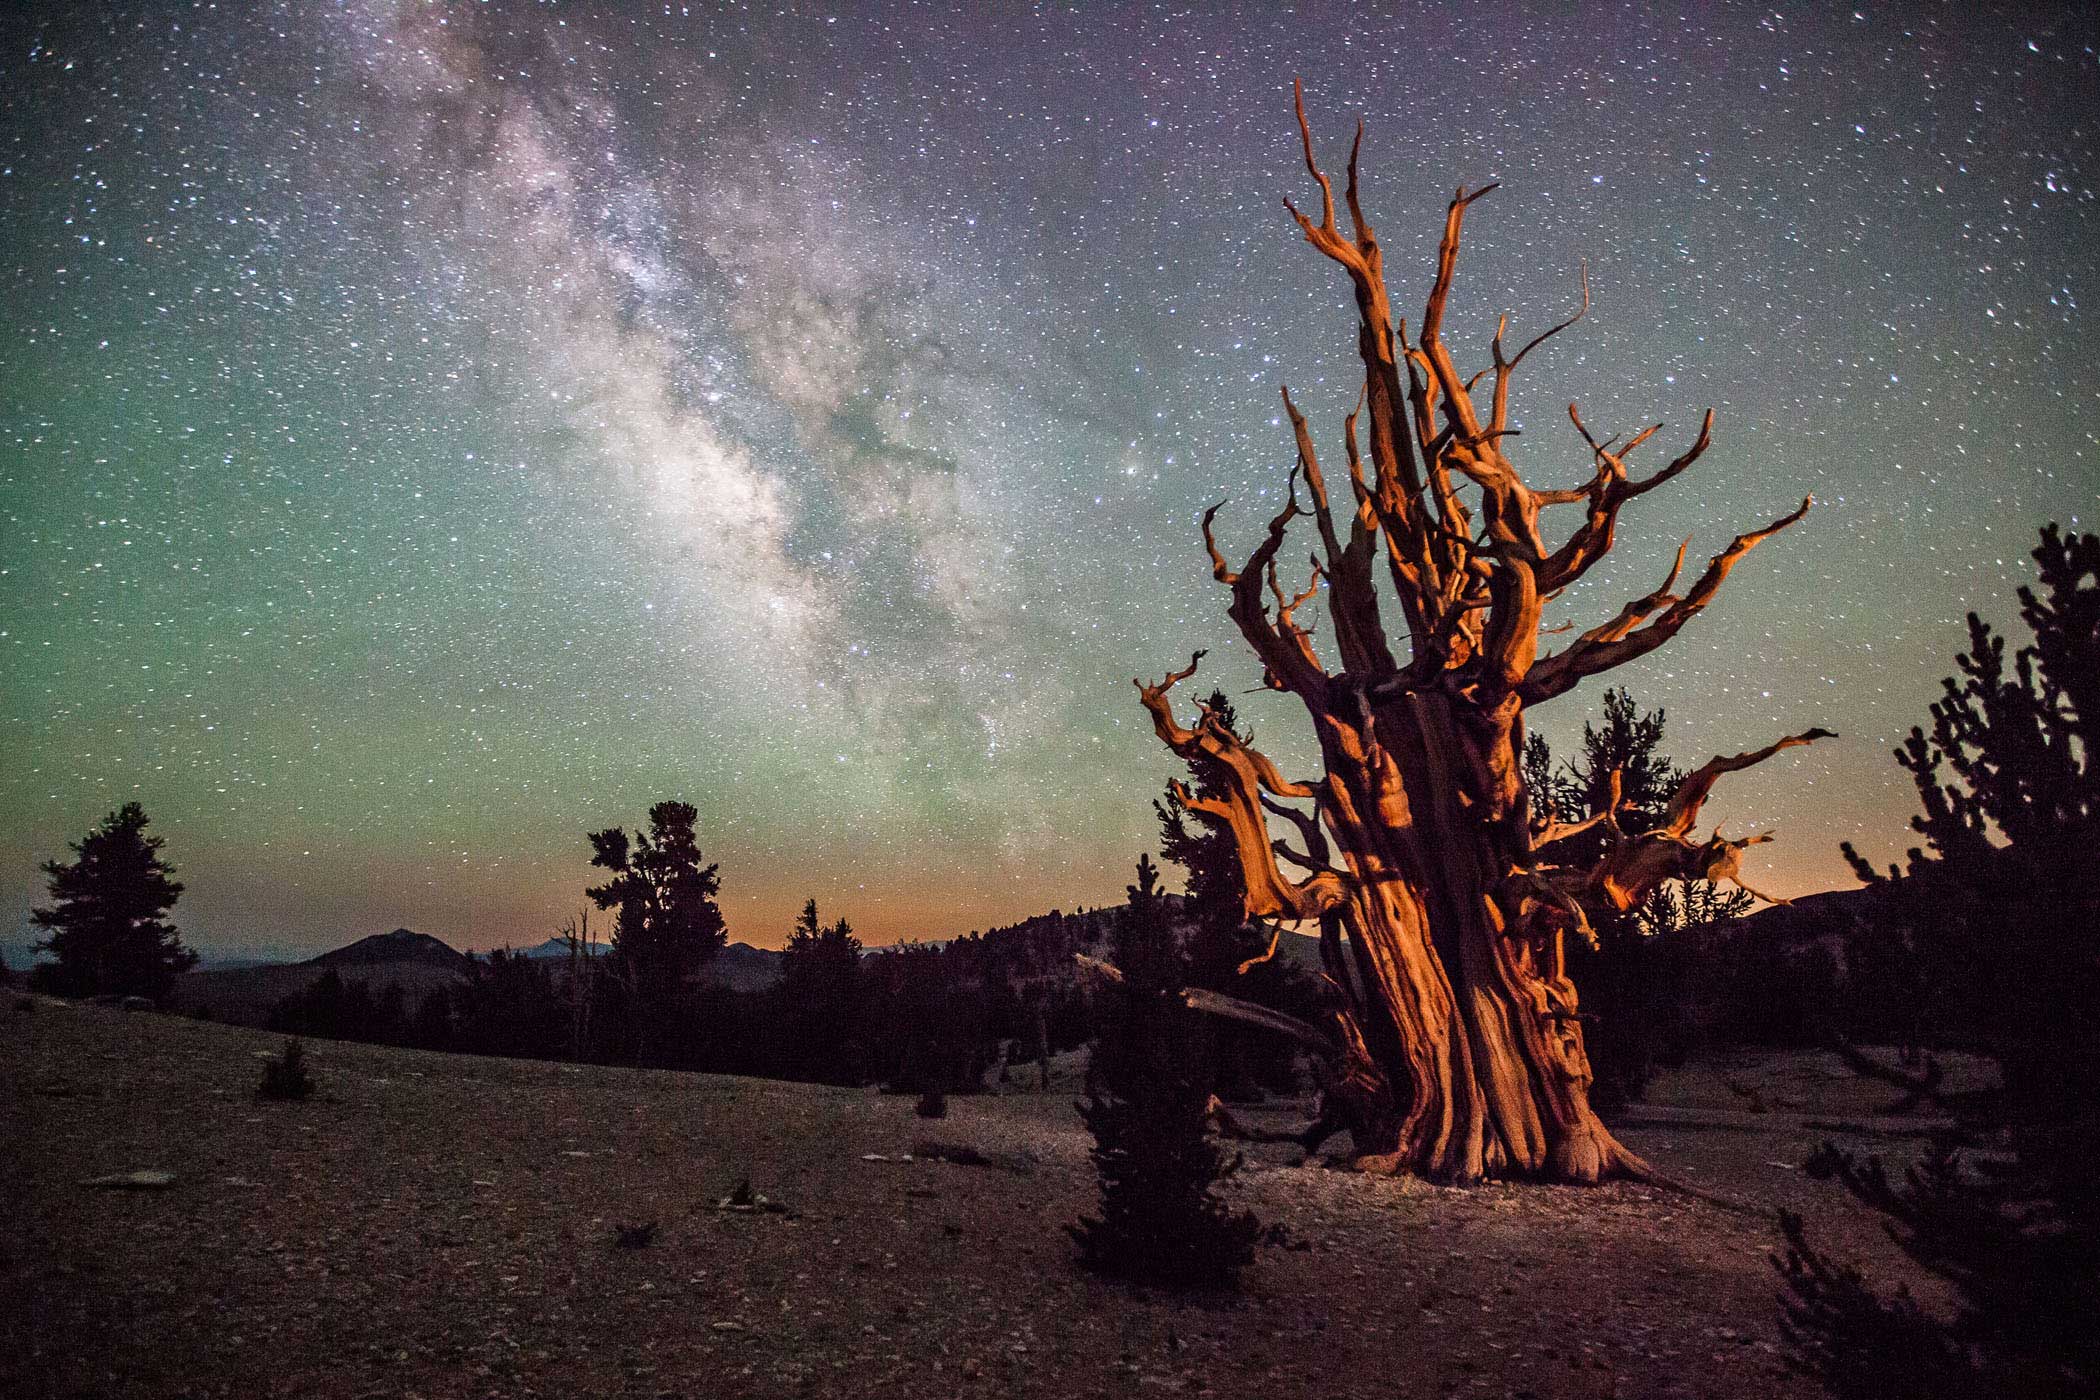 Earth and space are evenly weighted in this wonderfully framed image of a Californian landscape beneath the Milky Way. The young photographer has chosen a view of an ancient bristlecone pine which is over 4,000 years old, and whose sloping trunk and gnarled branches provide perfect counterpoint to the edge-on view of the starry disc and knotted structure of our galaxy.